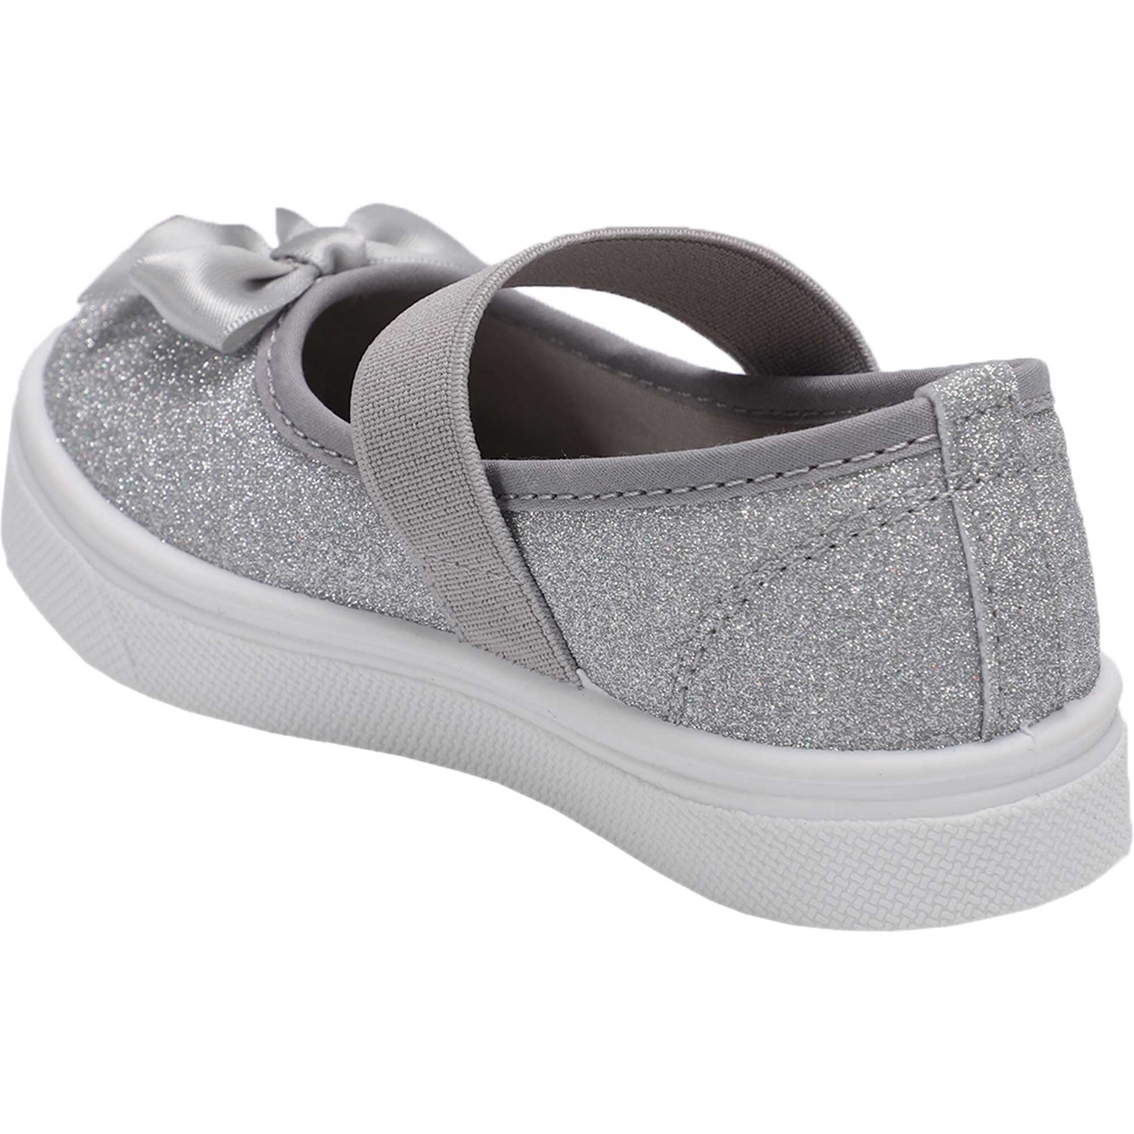 Oomphies Toddler Girls Quinn Mary Jane Sneakers - Image 3 of 4